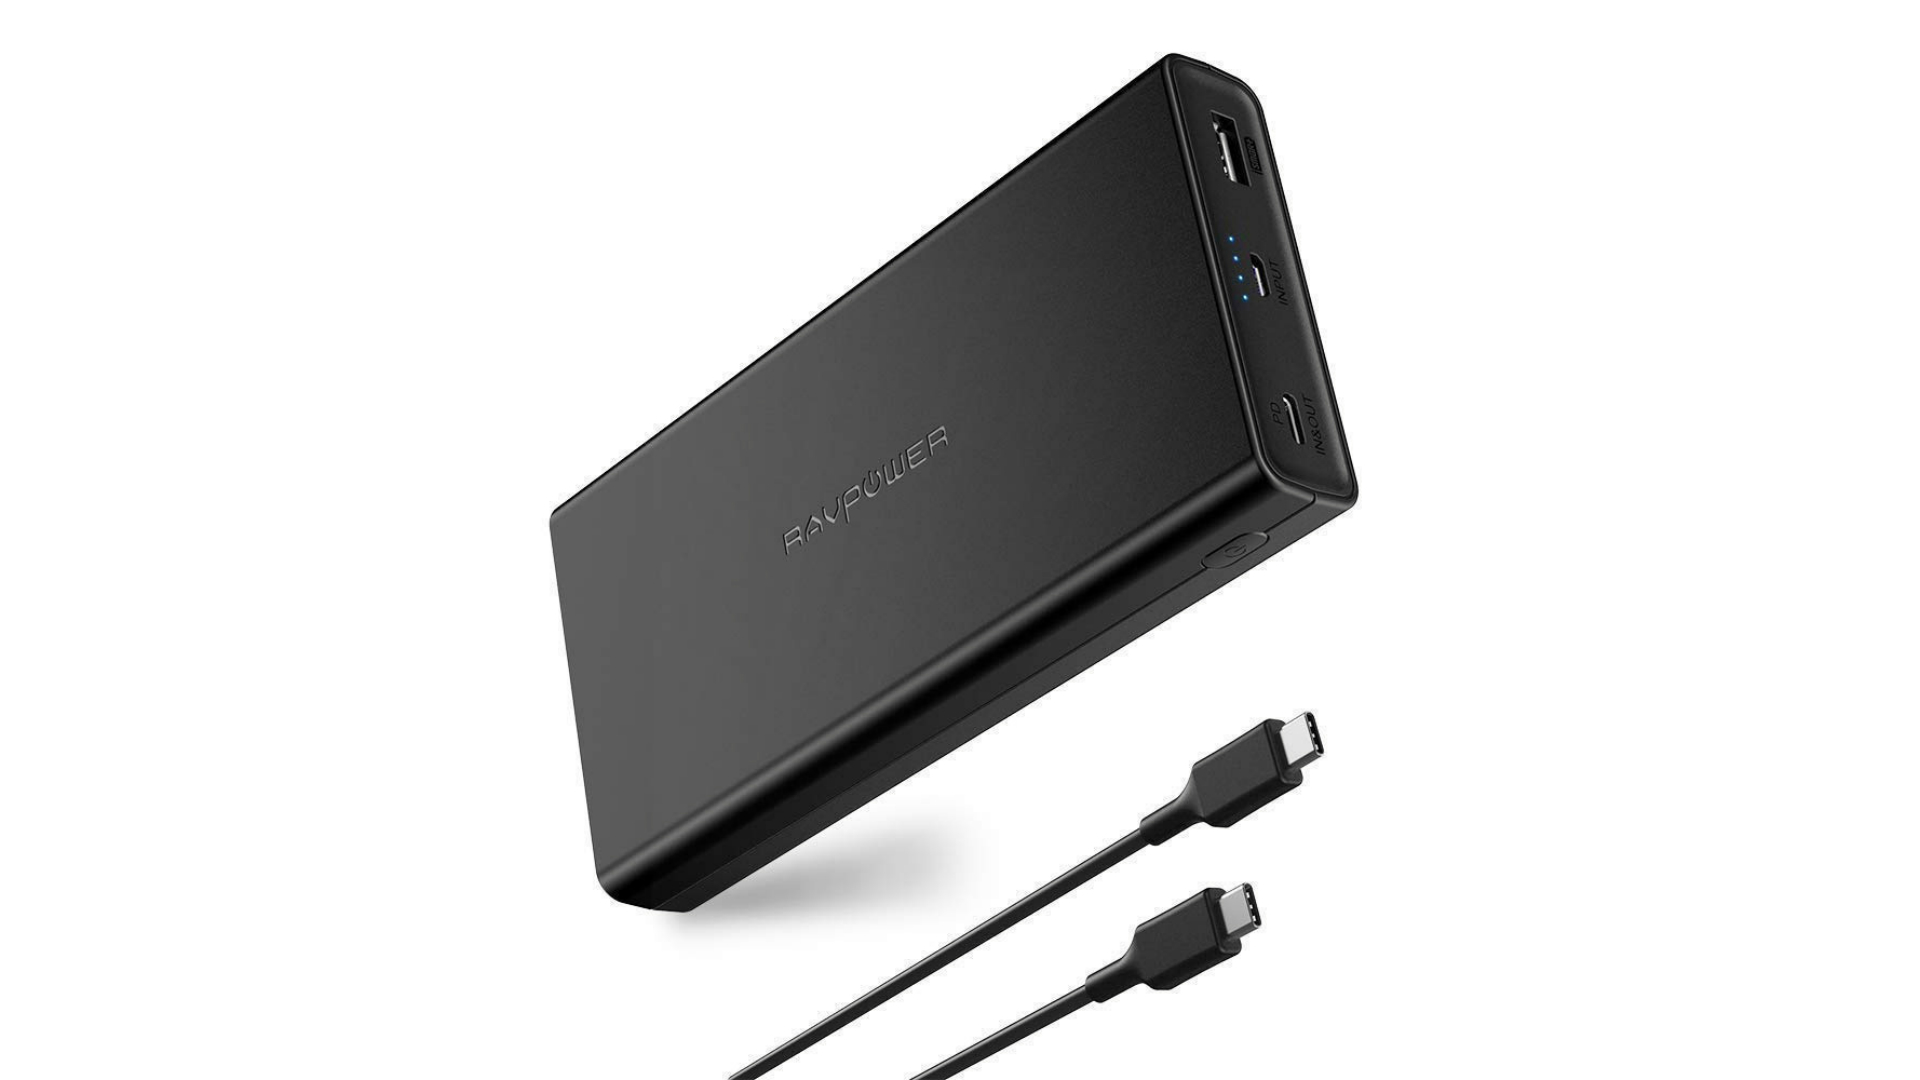 RAVPower 20800mAh portable battery charger